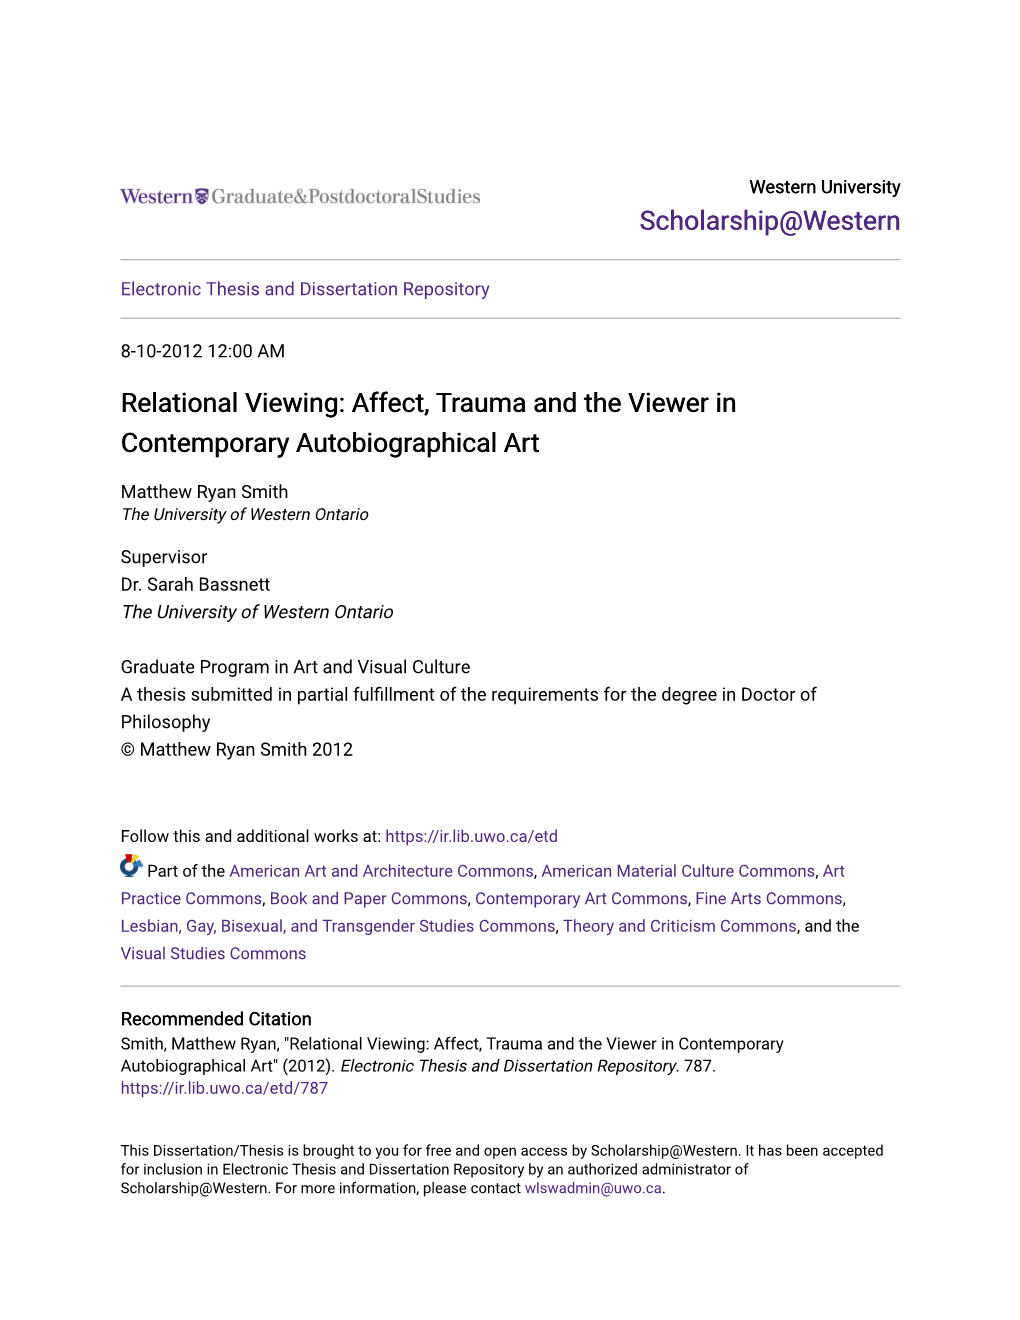 Relational Viewing: Affect, Trauma and the Viewer in Contemporary Autobiographical Art